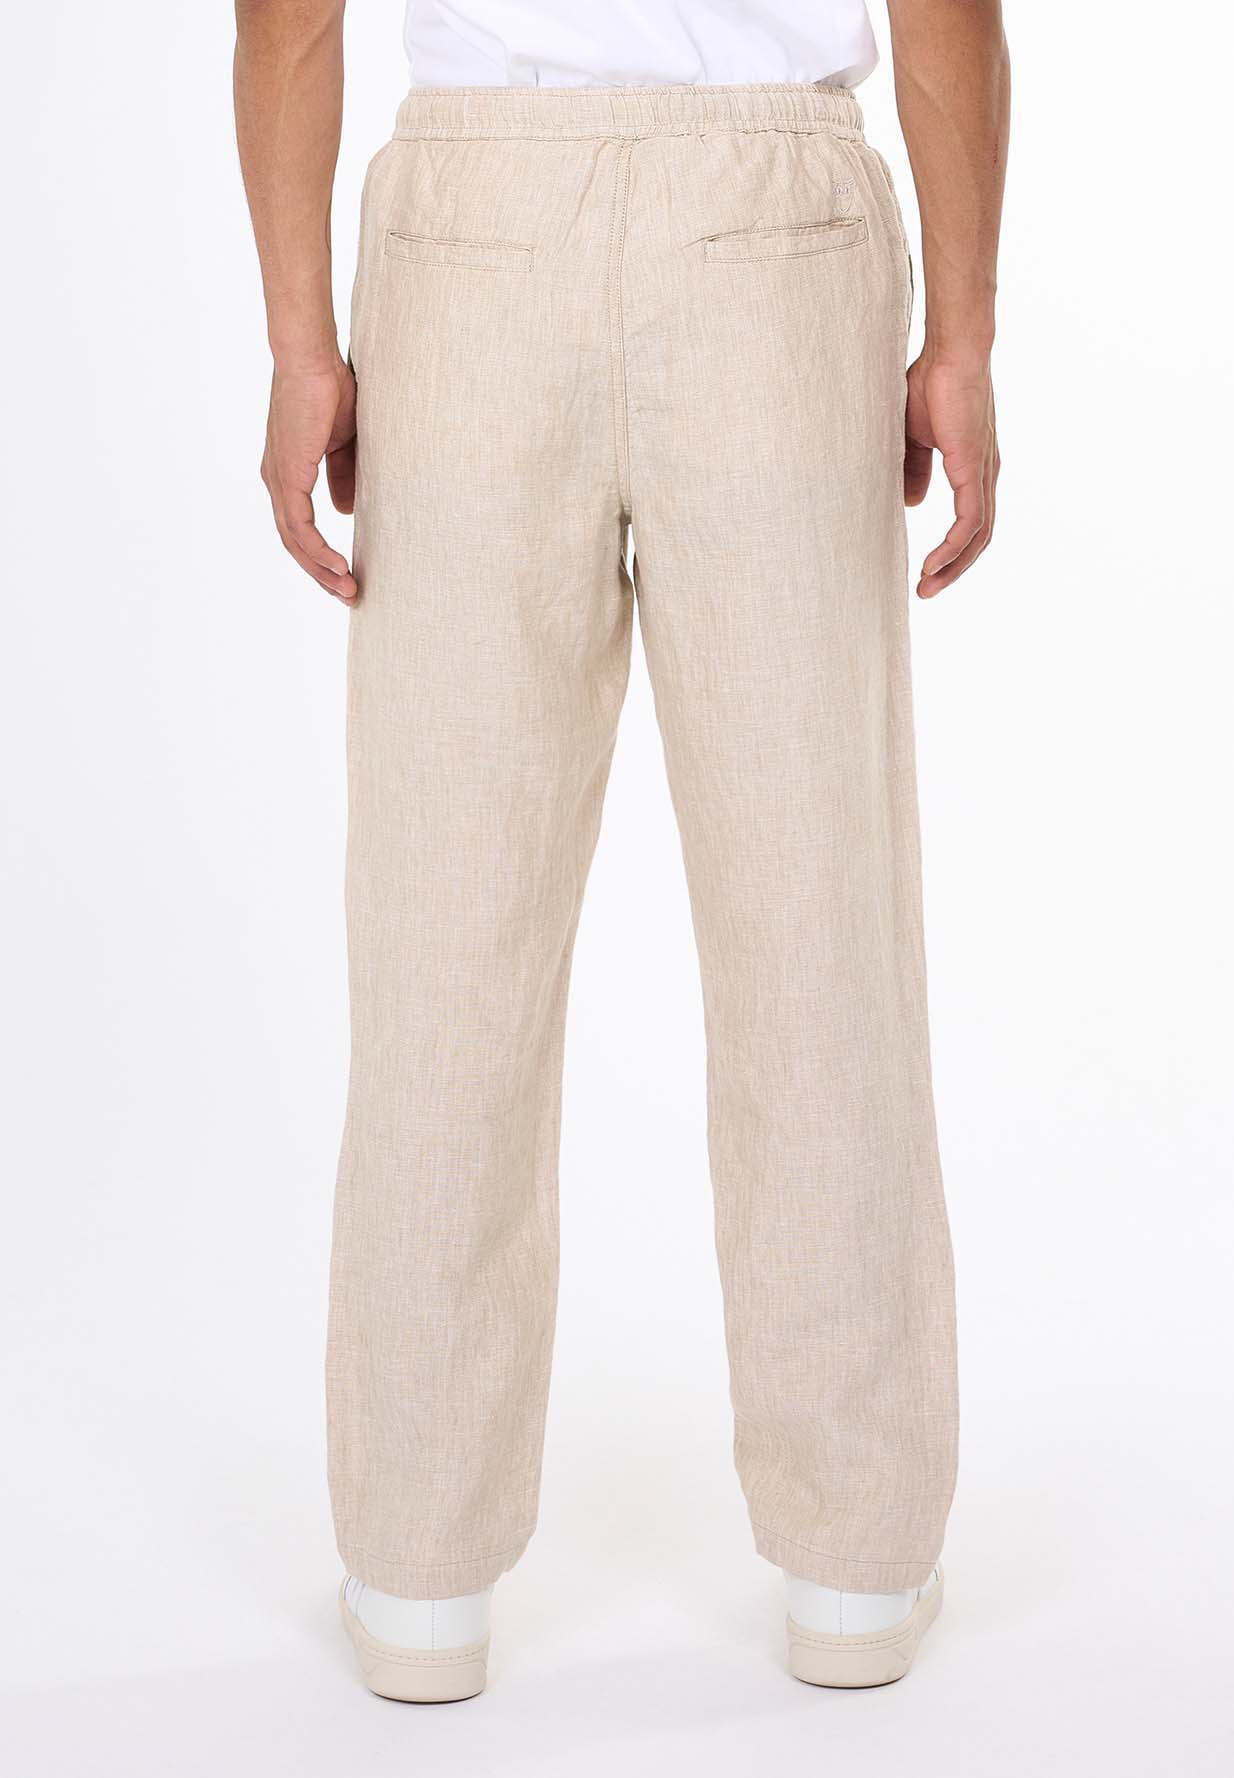 KNOWLEDGECOTTON APPAREL Loose Linen Pant light feather gray M